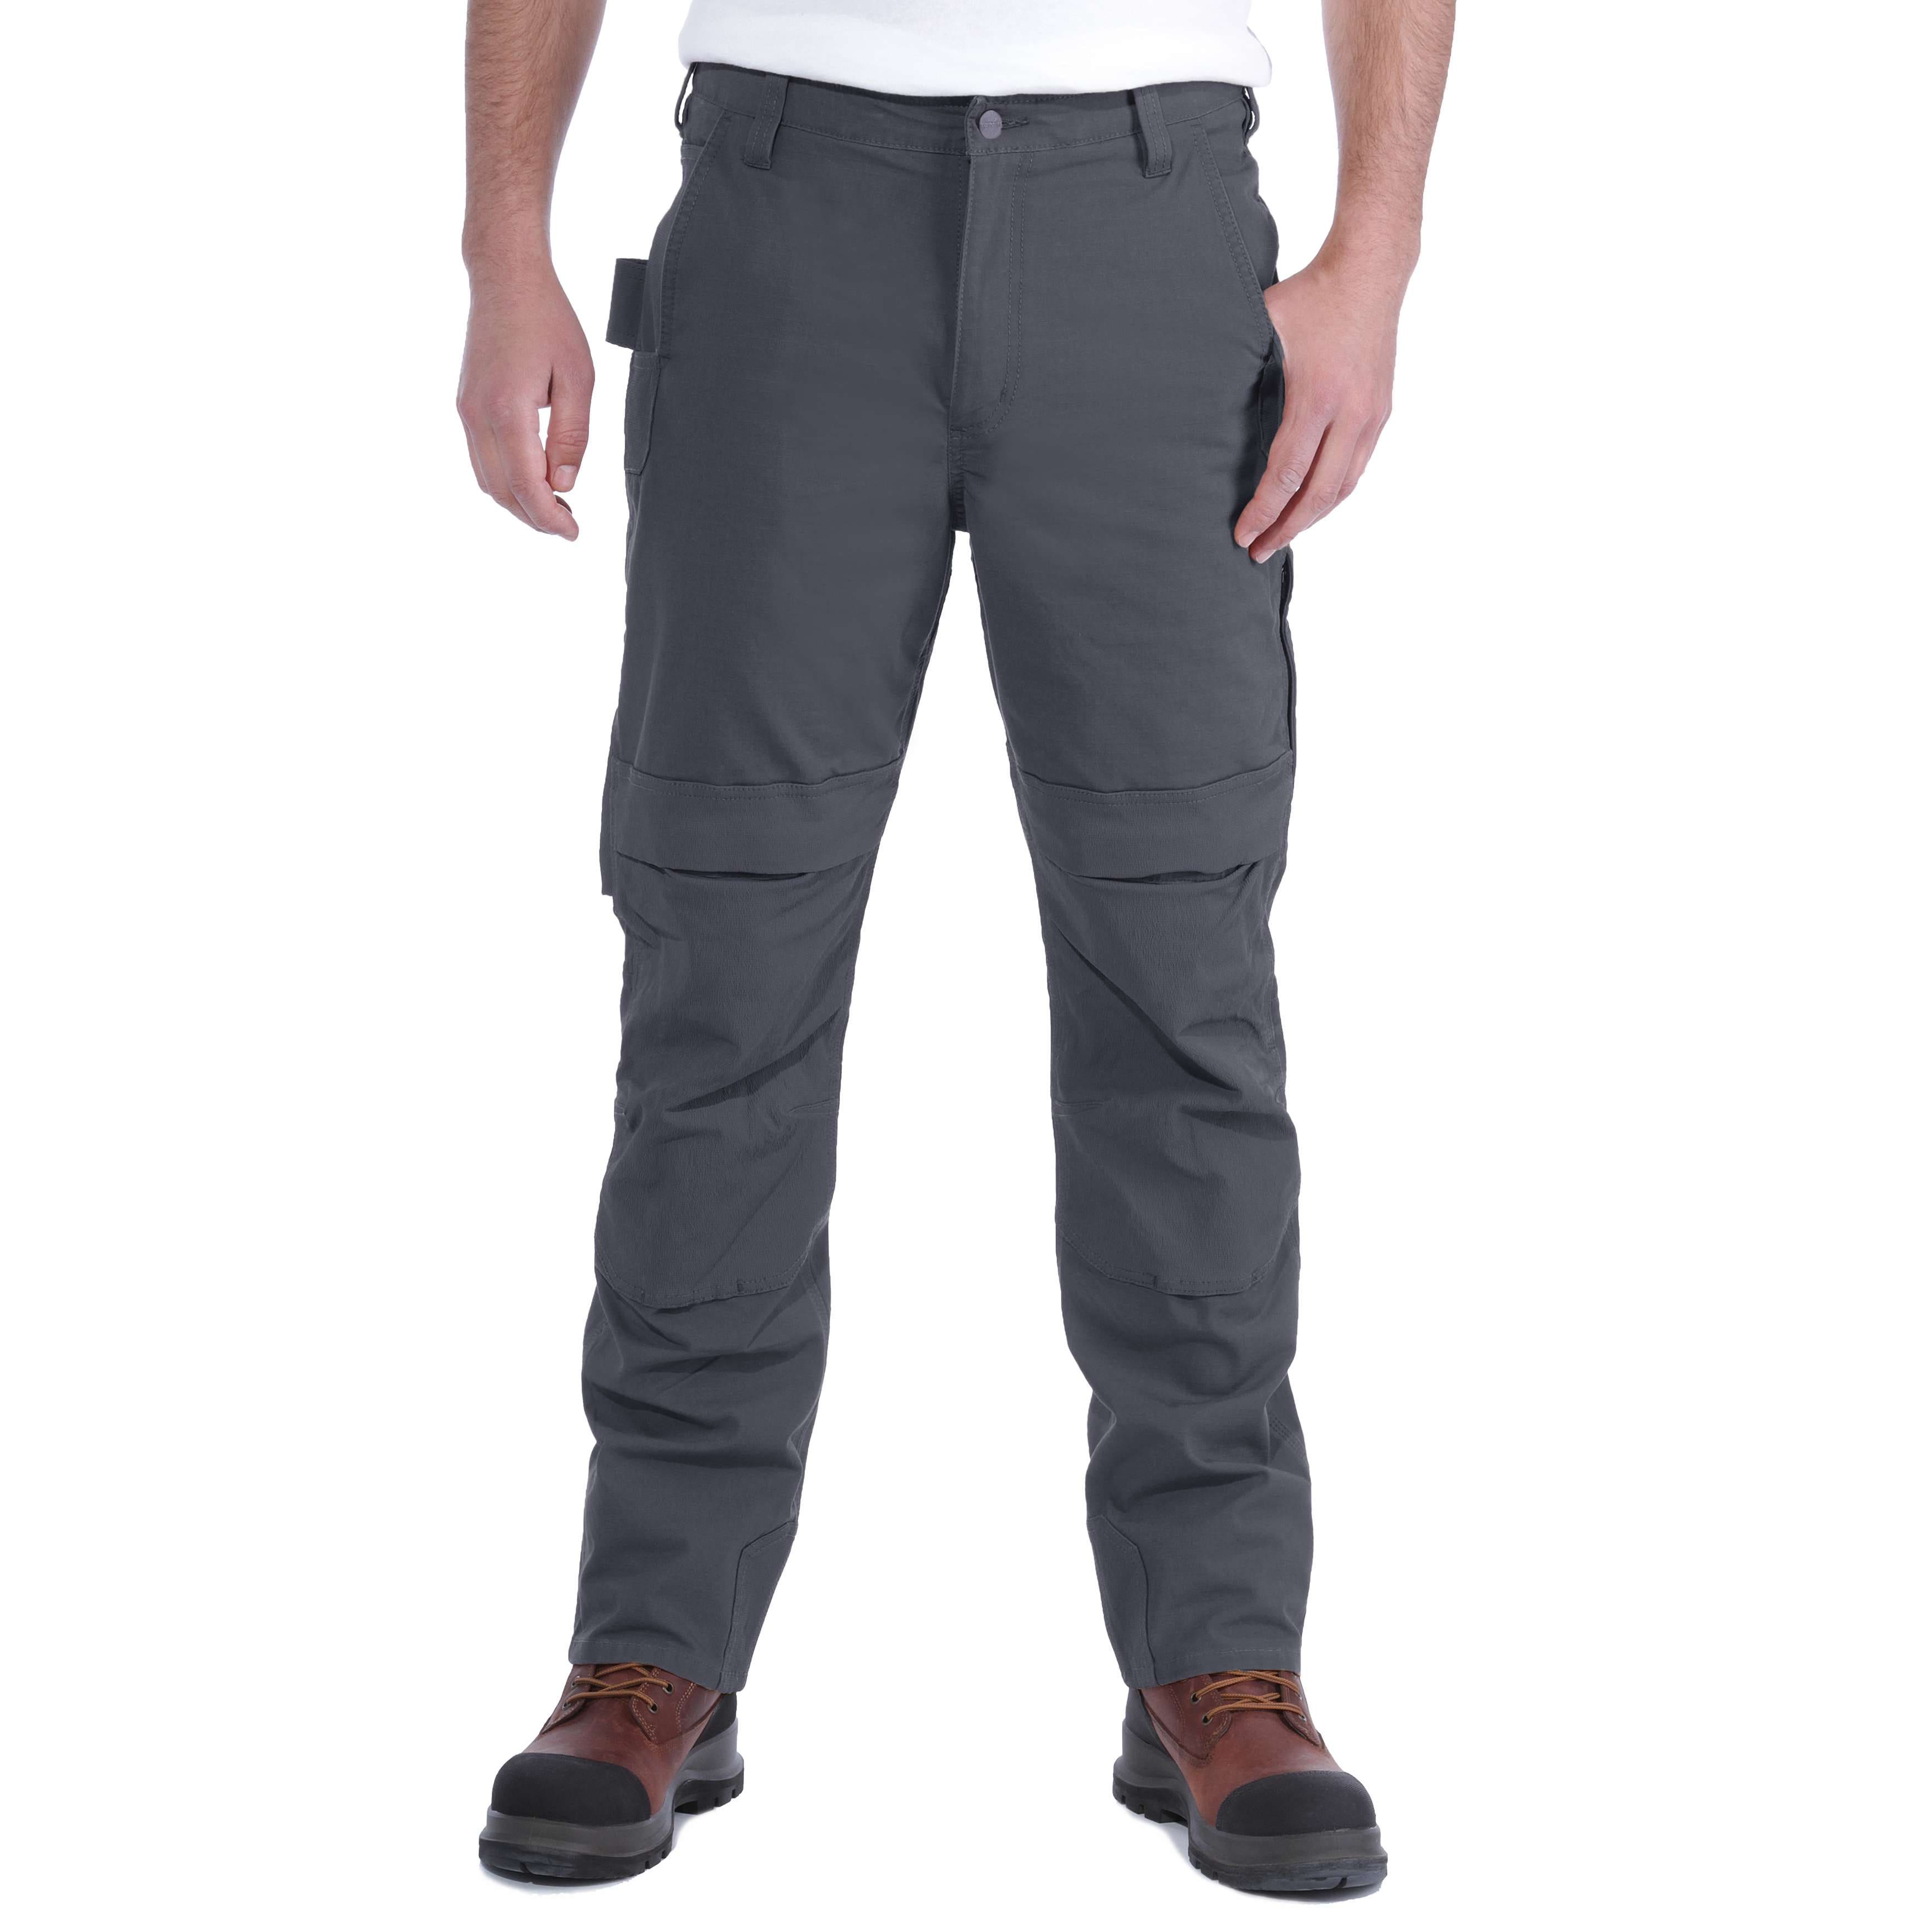 CARHARTT 105461 - Rugged Flex Relaxed Fit Ripstop Cargo Work Pant